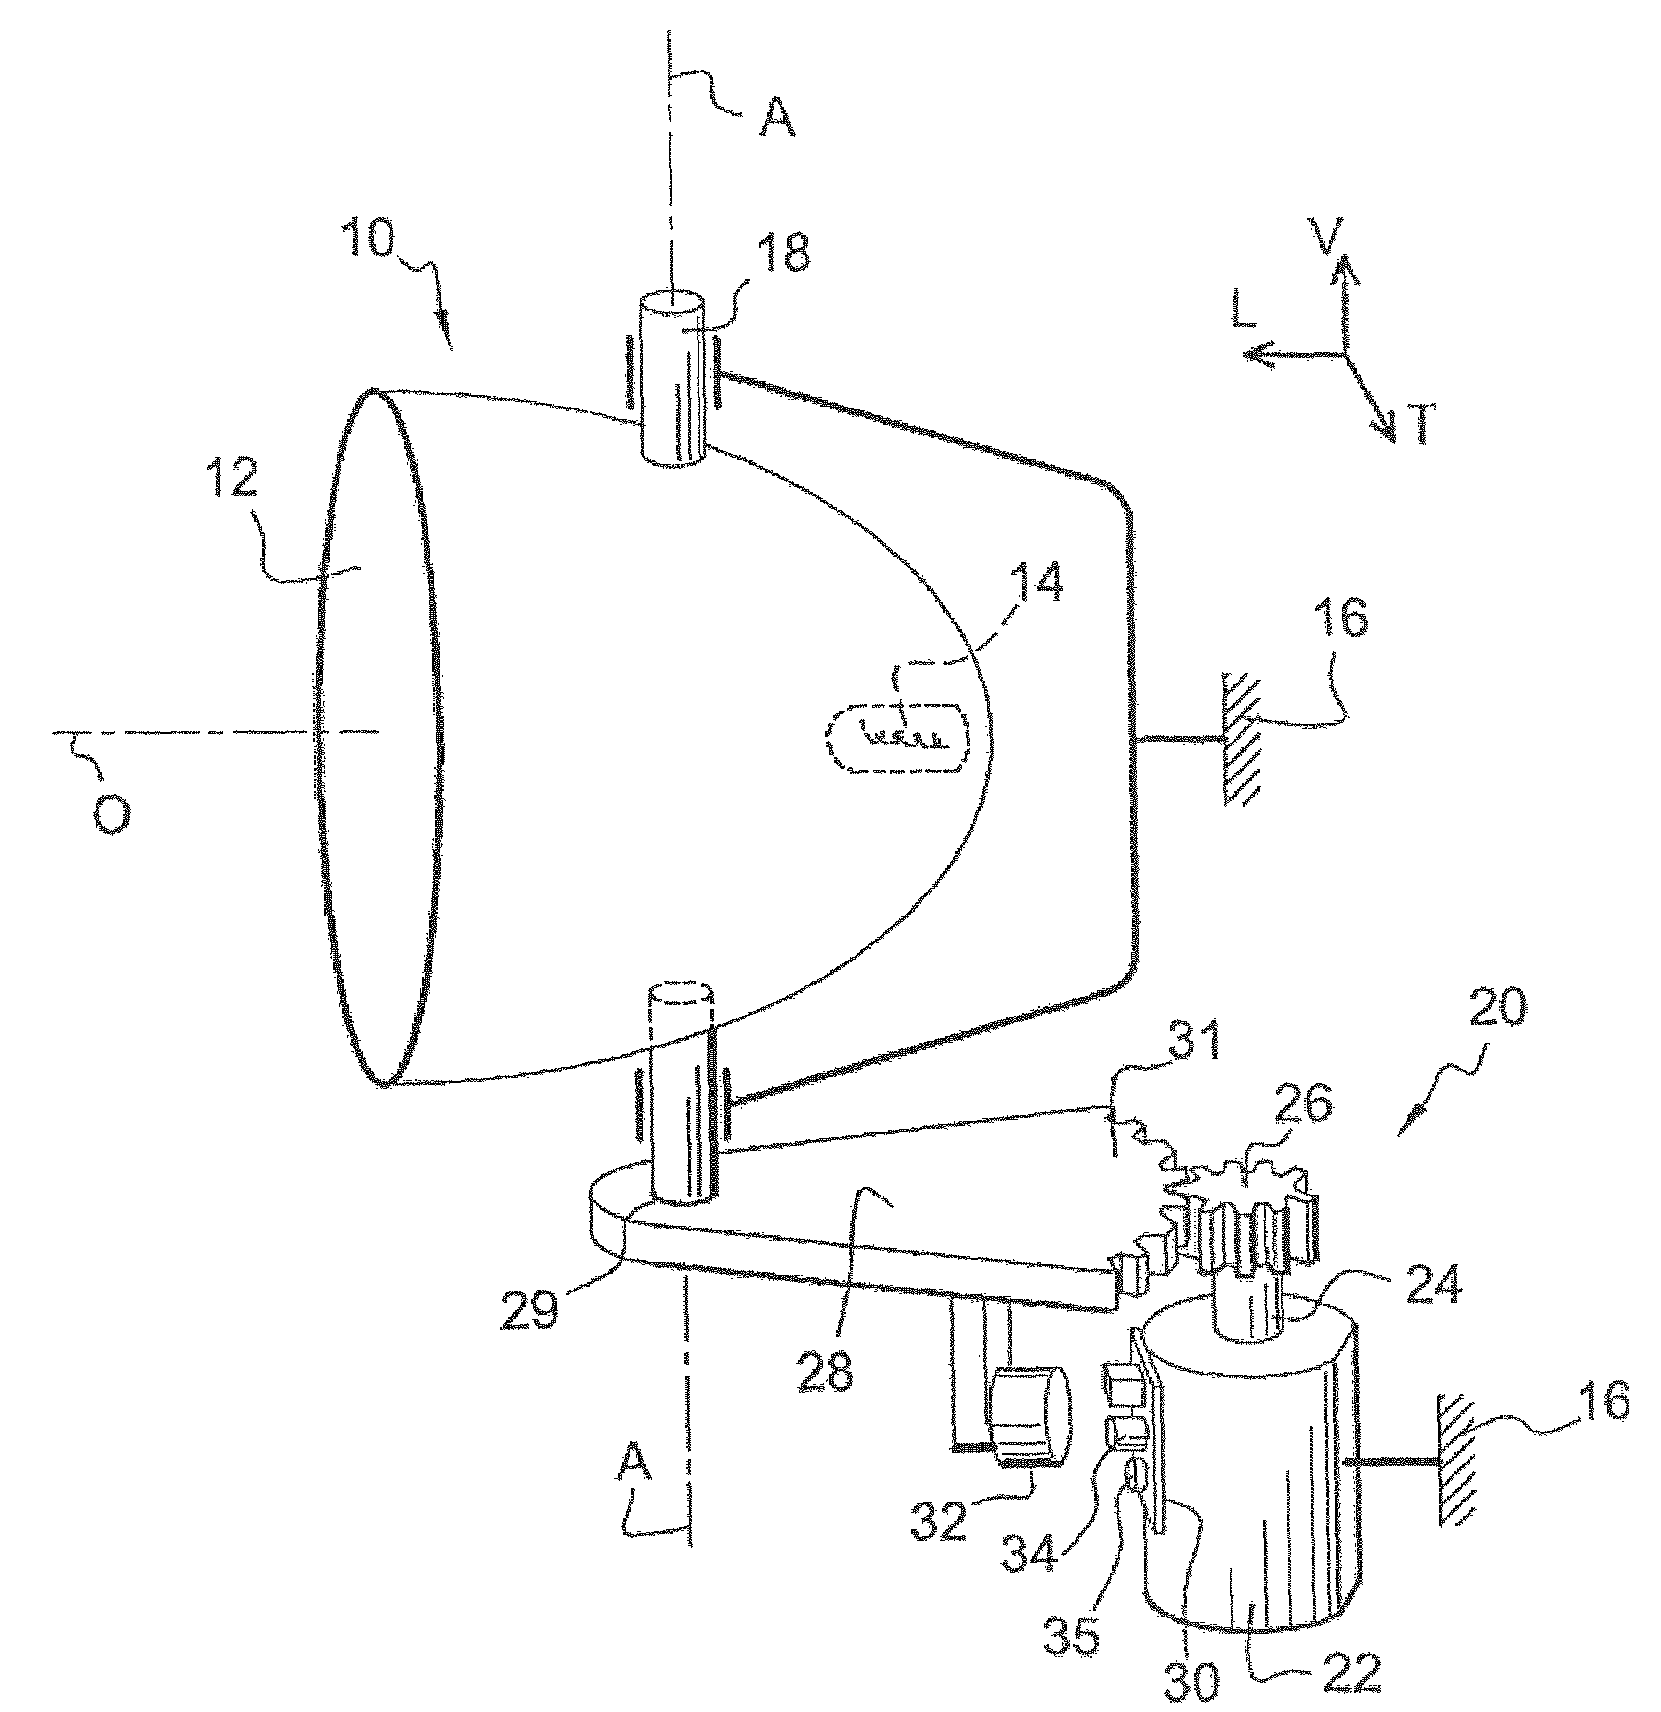 Method of determining the angular position of a headlight by several magnetic field measurement means